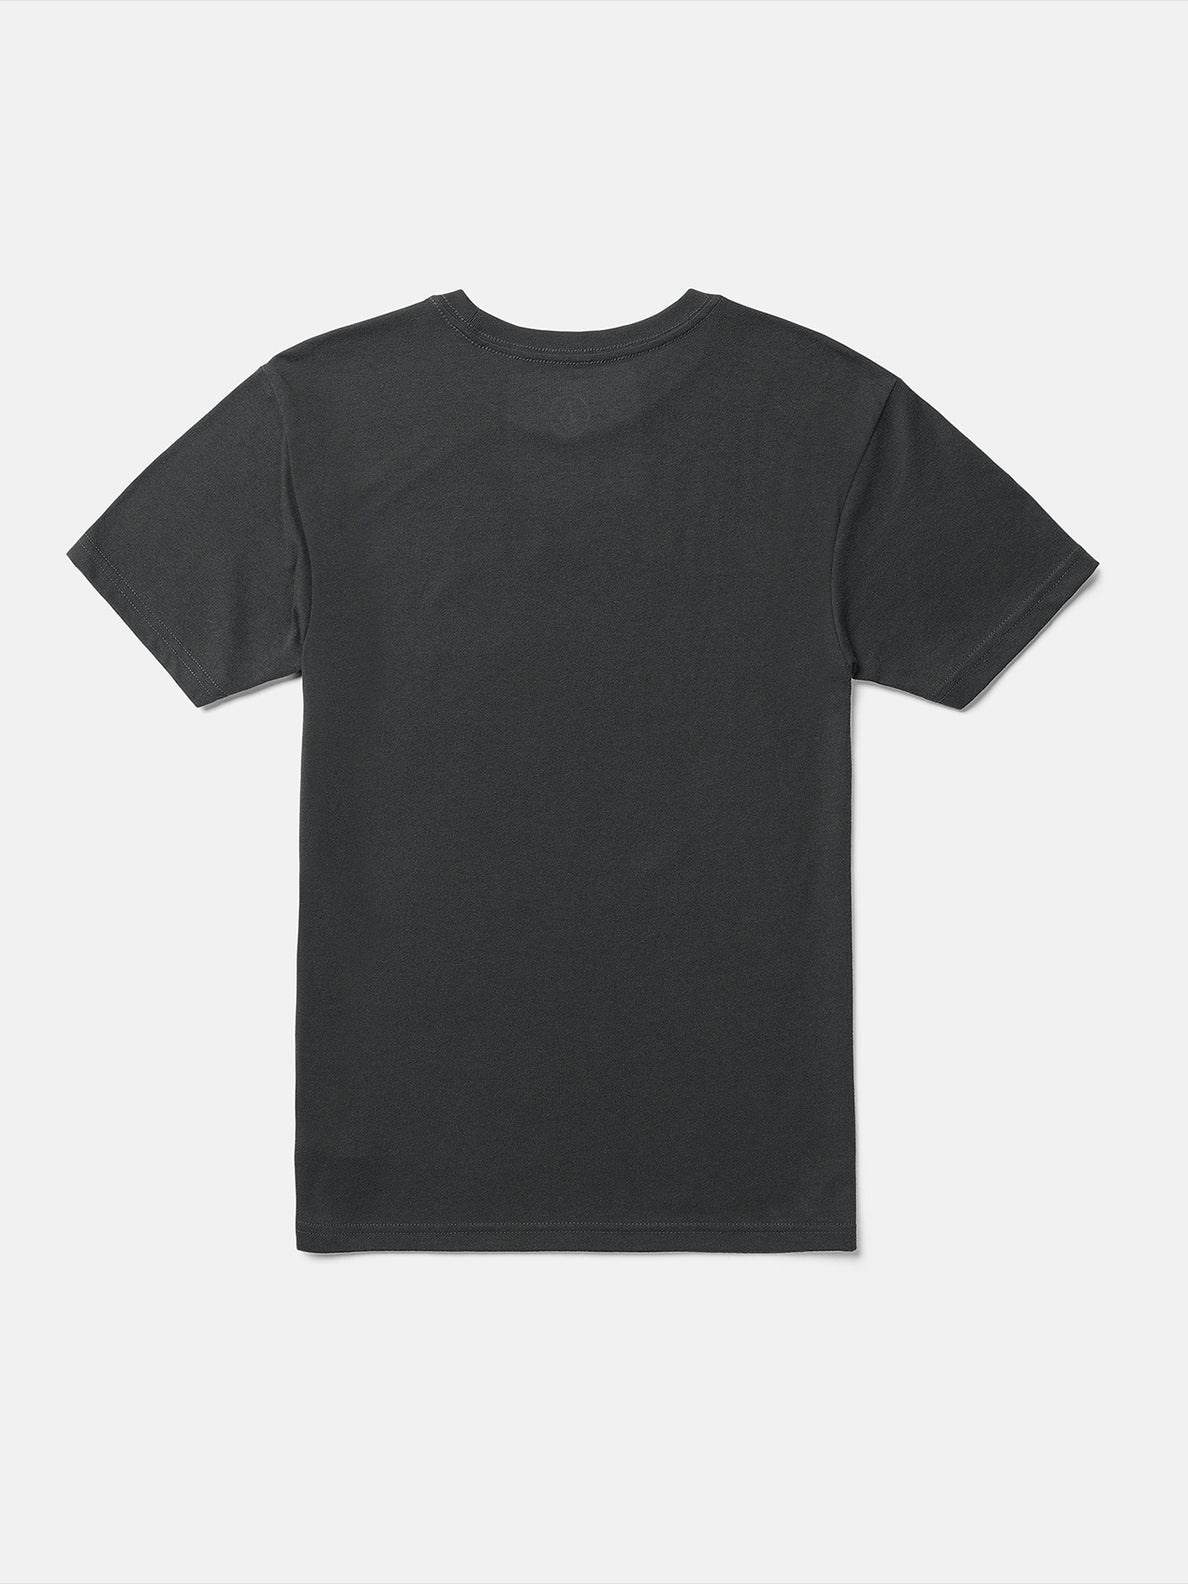 Little Boys Octoparty Short Sleeve Tee - Washed Black Heather